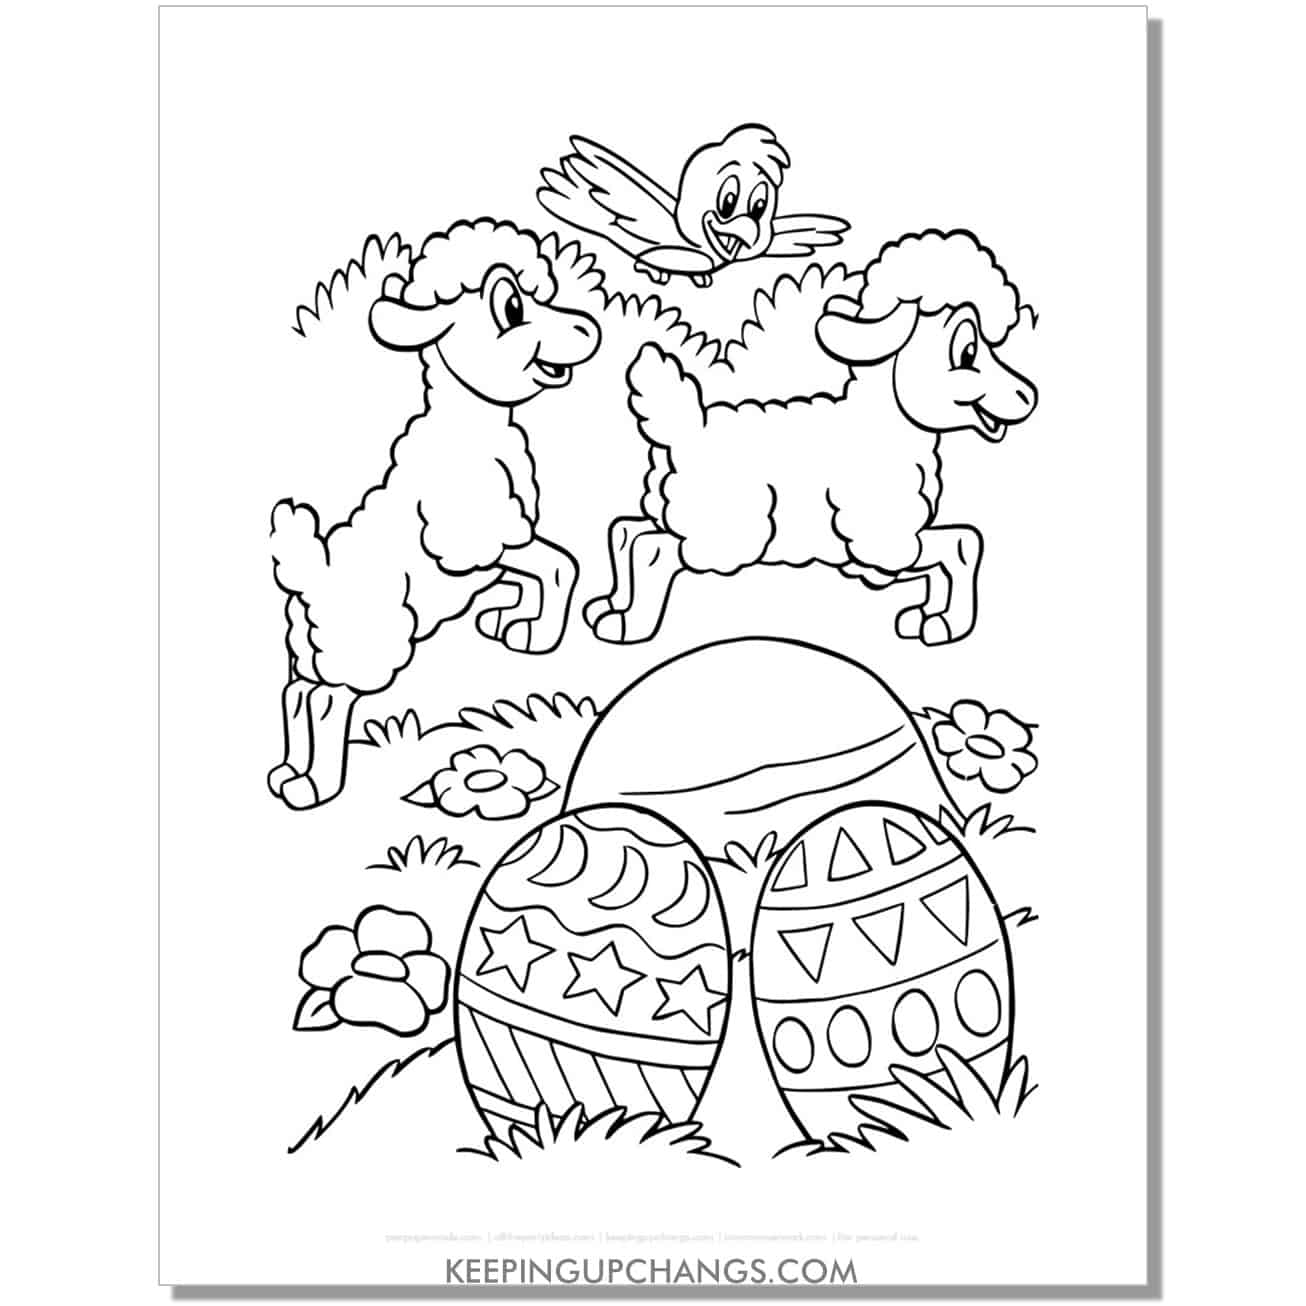 sheep and bird with egg chick coloring page, sheet.